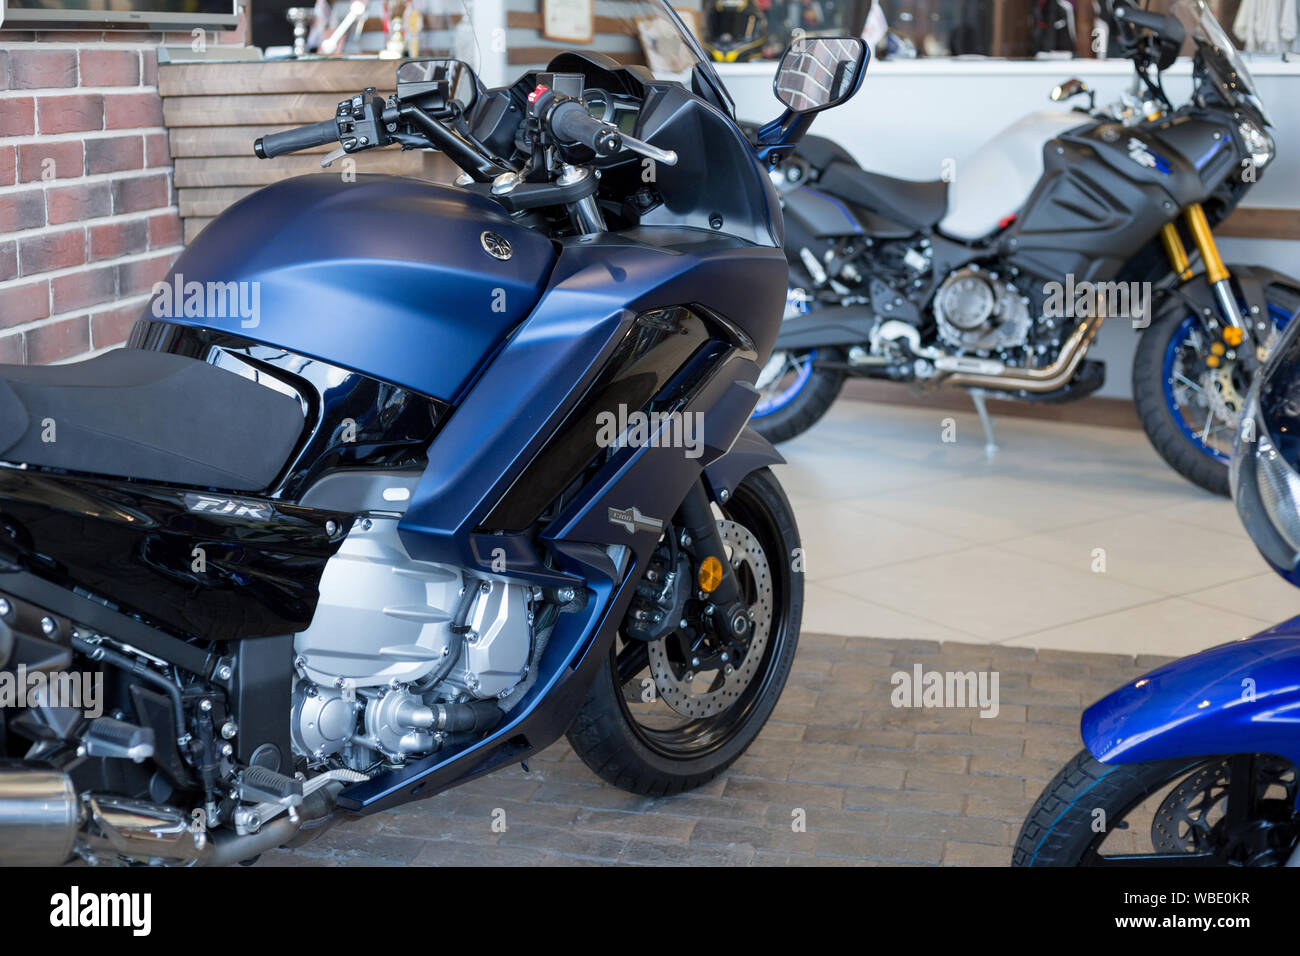 Russia, Izhevsk - August 23, 2019: Yamaha motorcycle shop. New motorbikes in modern motorcycle store. Famous world brand. Stock Photo